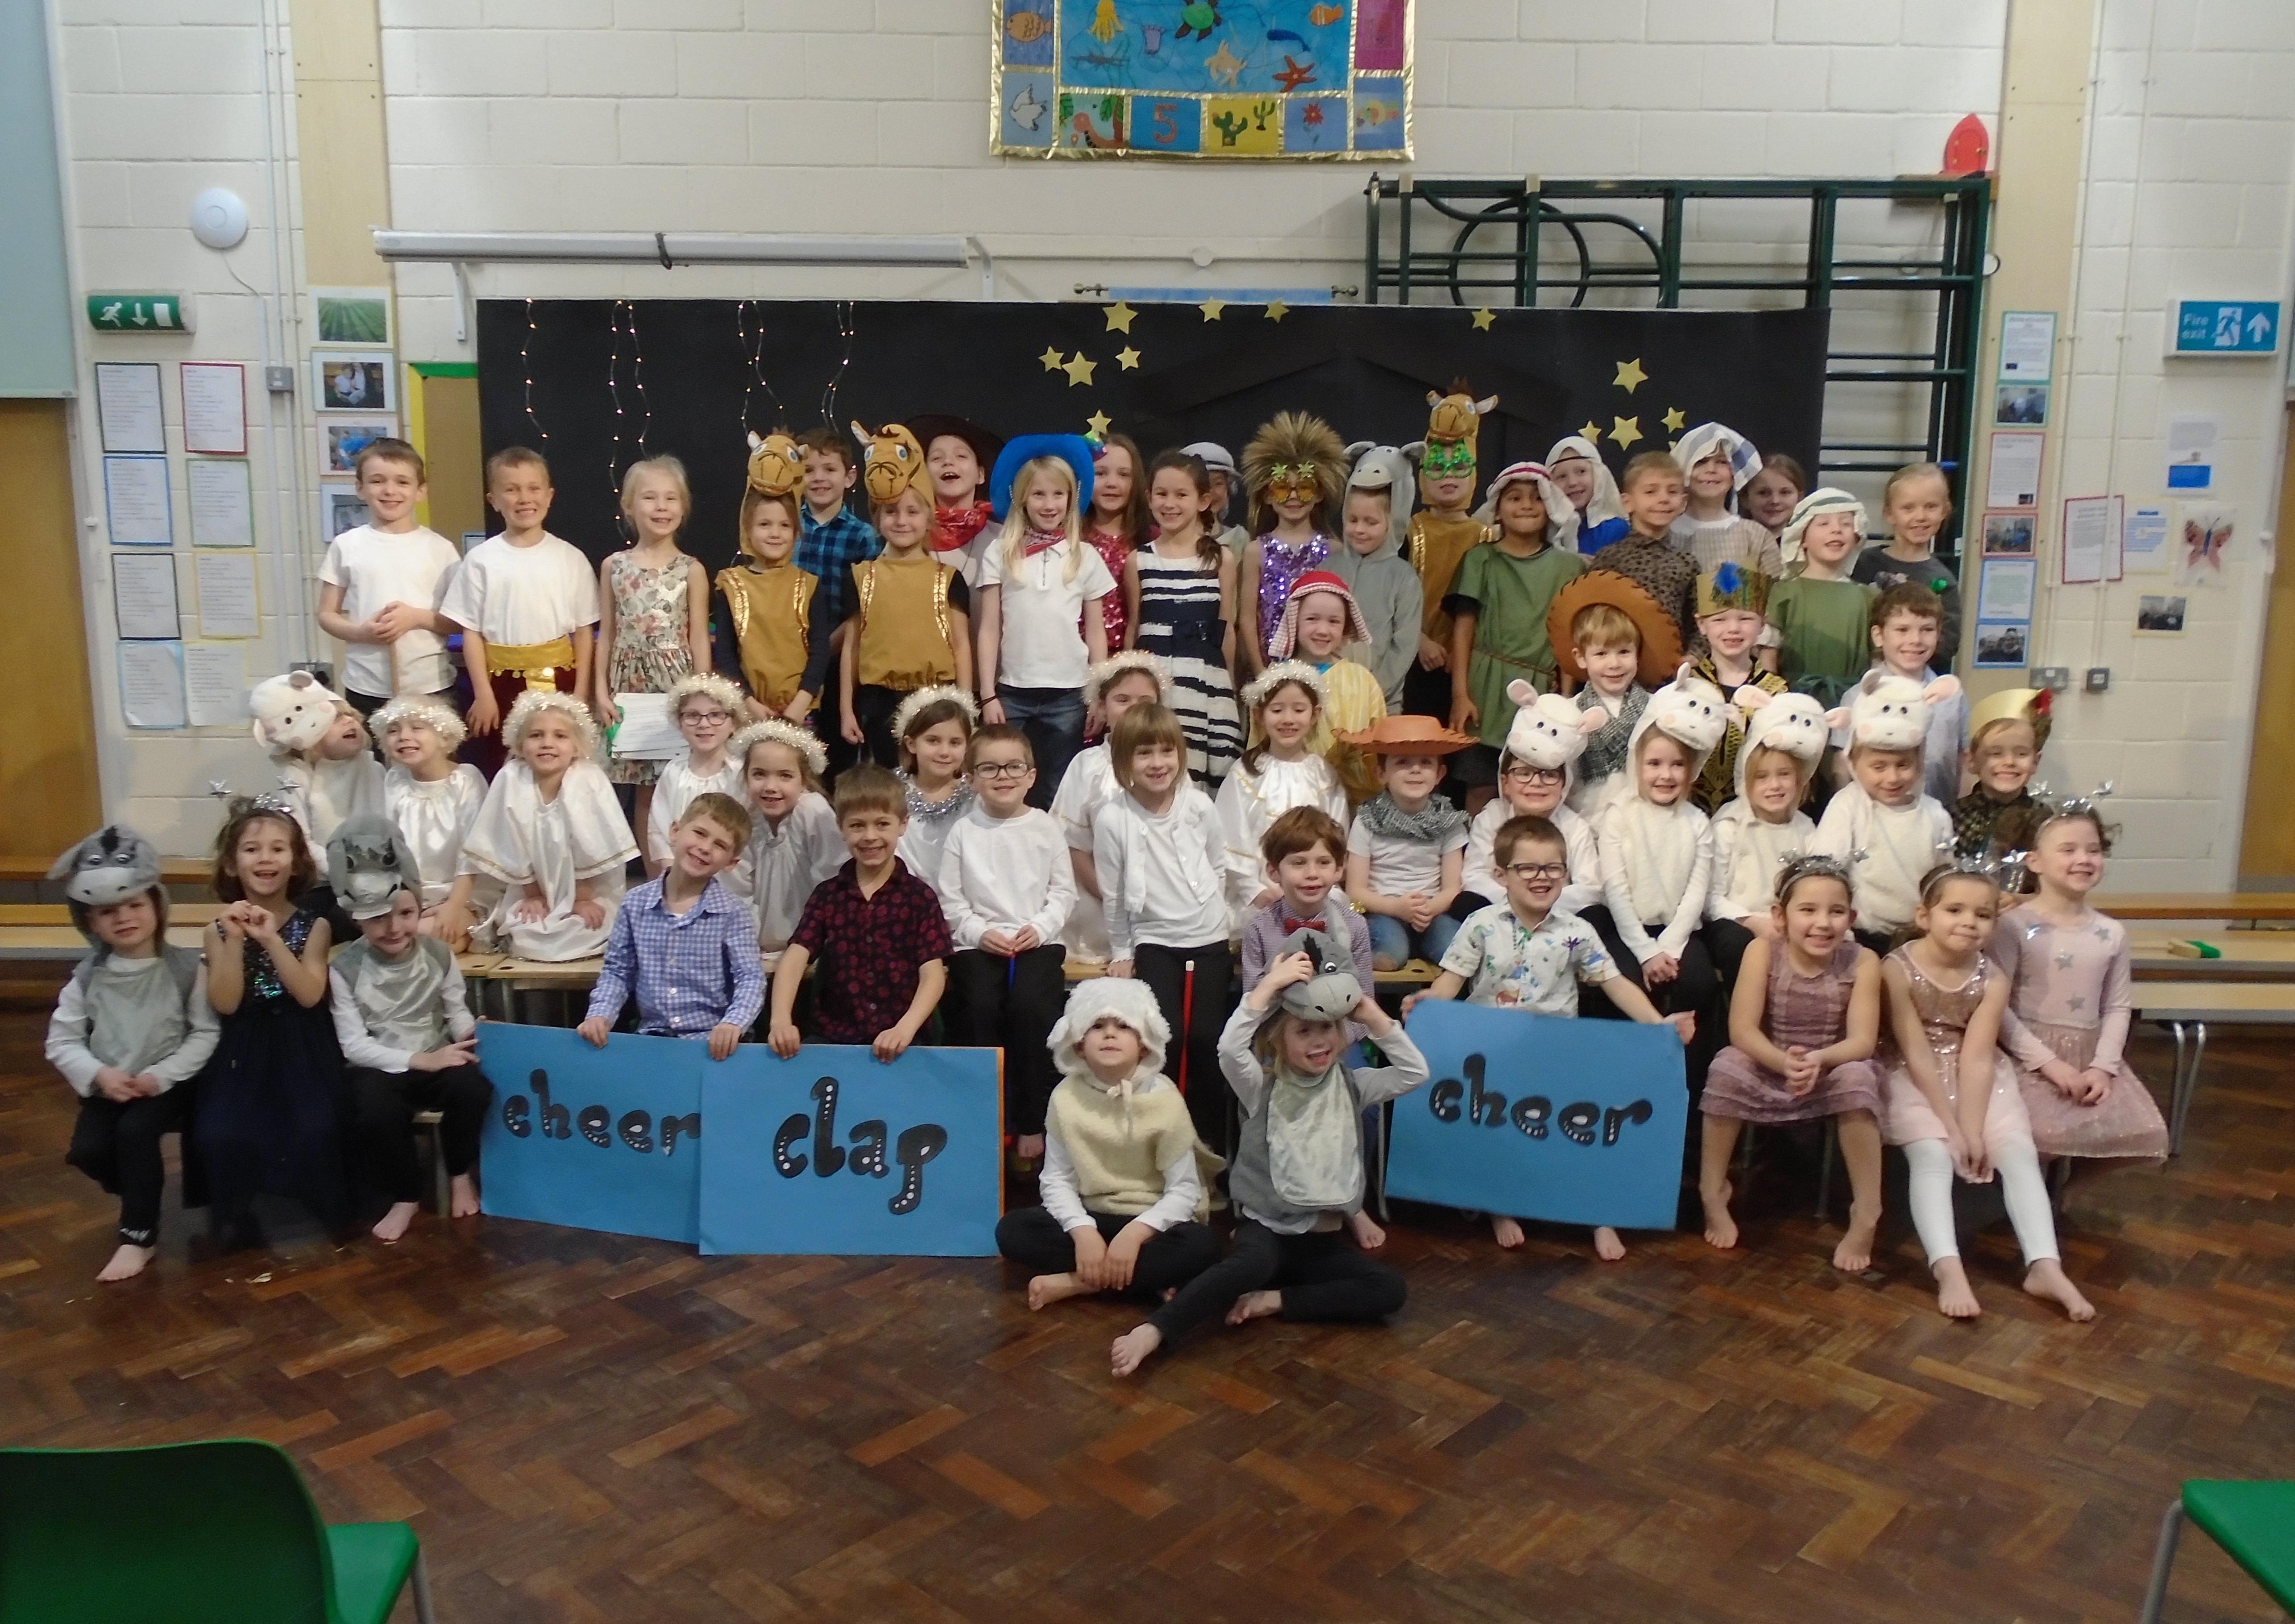 Ashington CE Primary School - The production, Lights, Camel, Action!, was performed by children in reception, year one and year two. The children worked hard completing three performances in a week SUS-191216-151444001